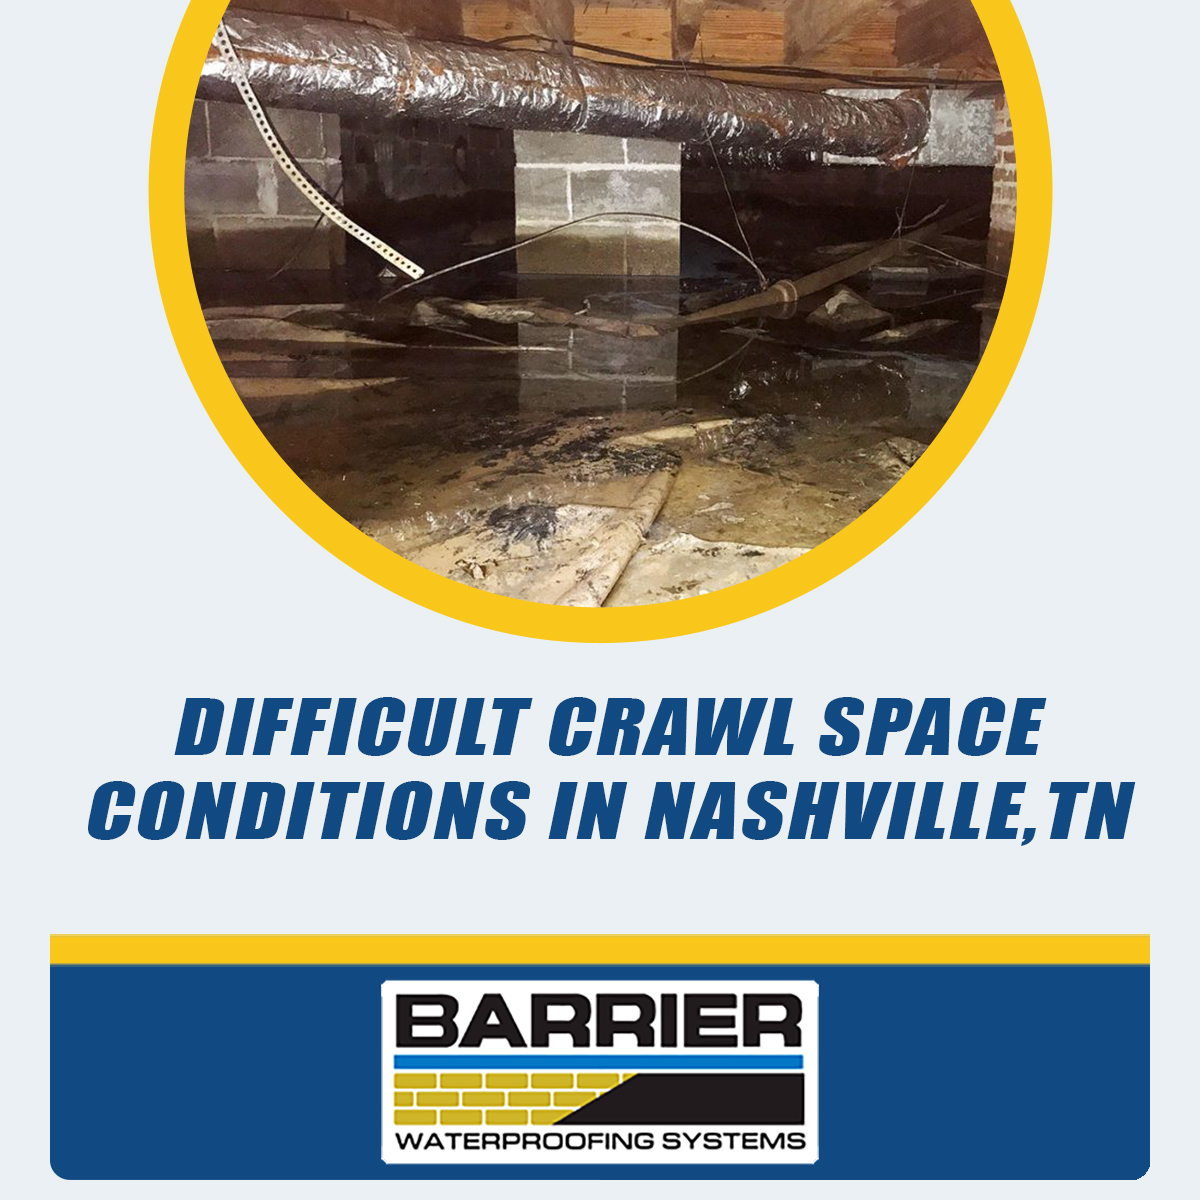 Difficult-Crawl-Space-Conditions-In-Nashville-TN